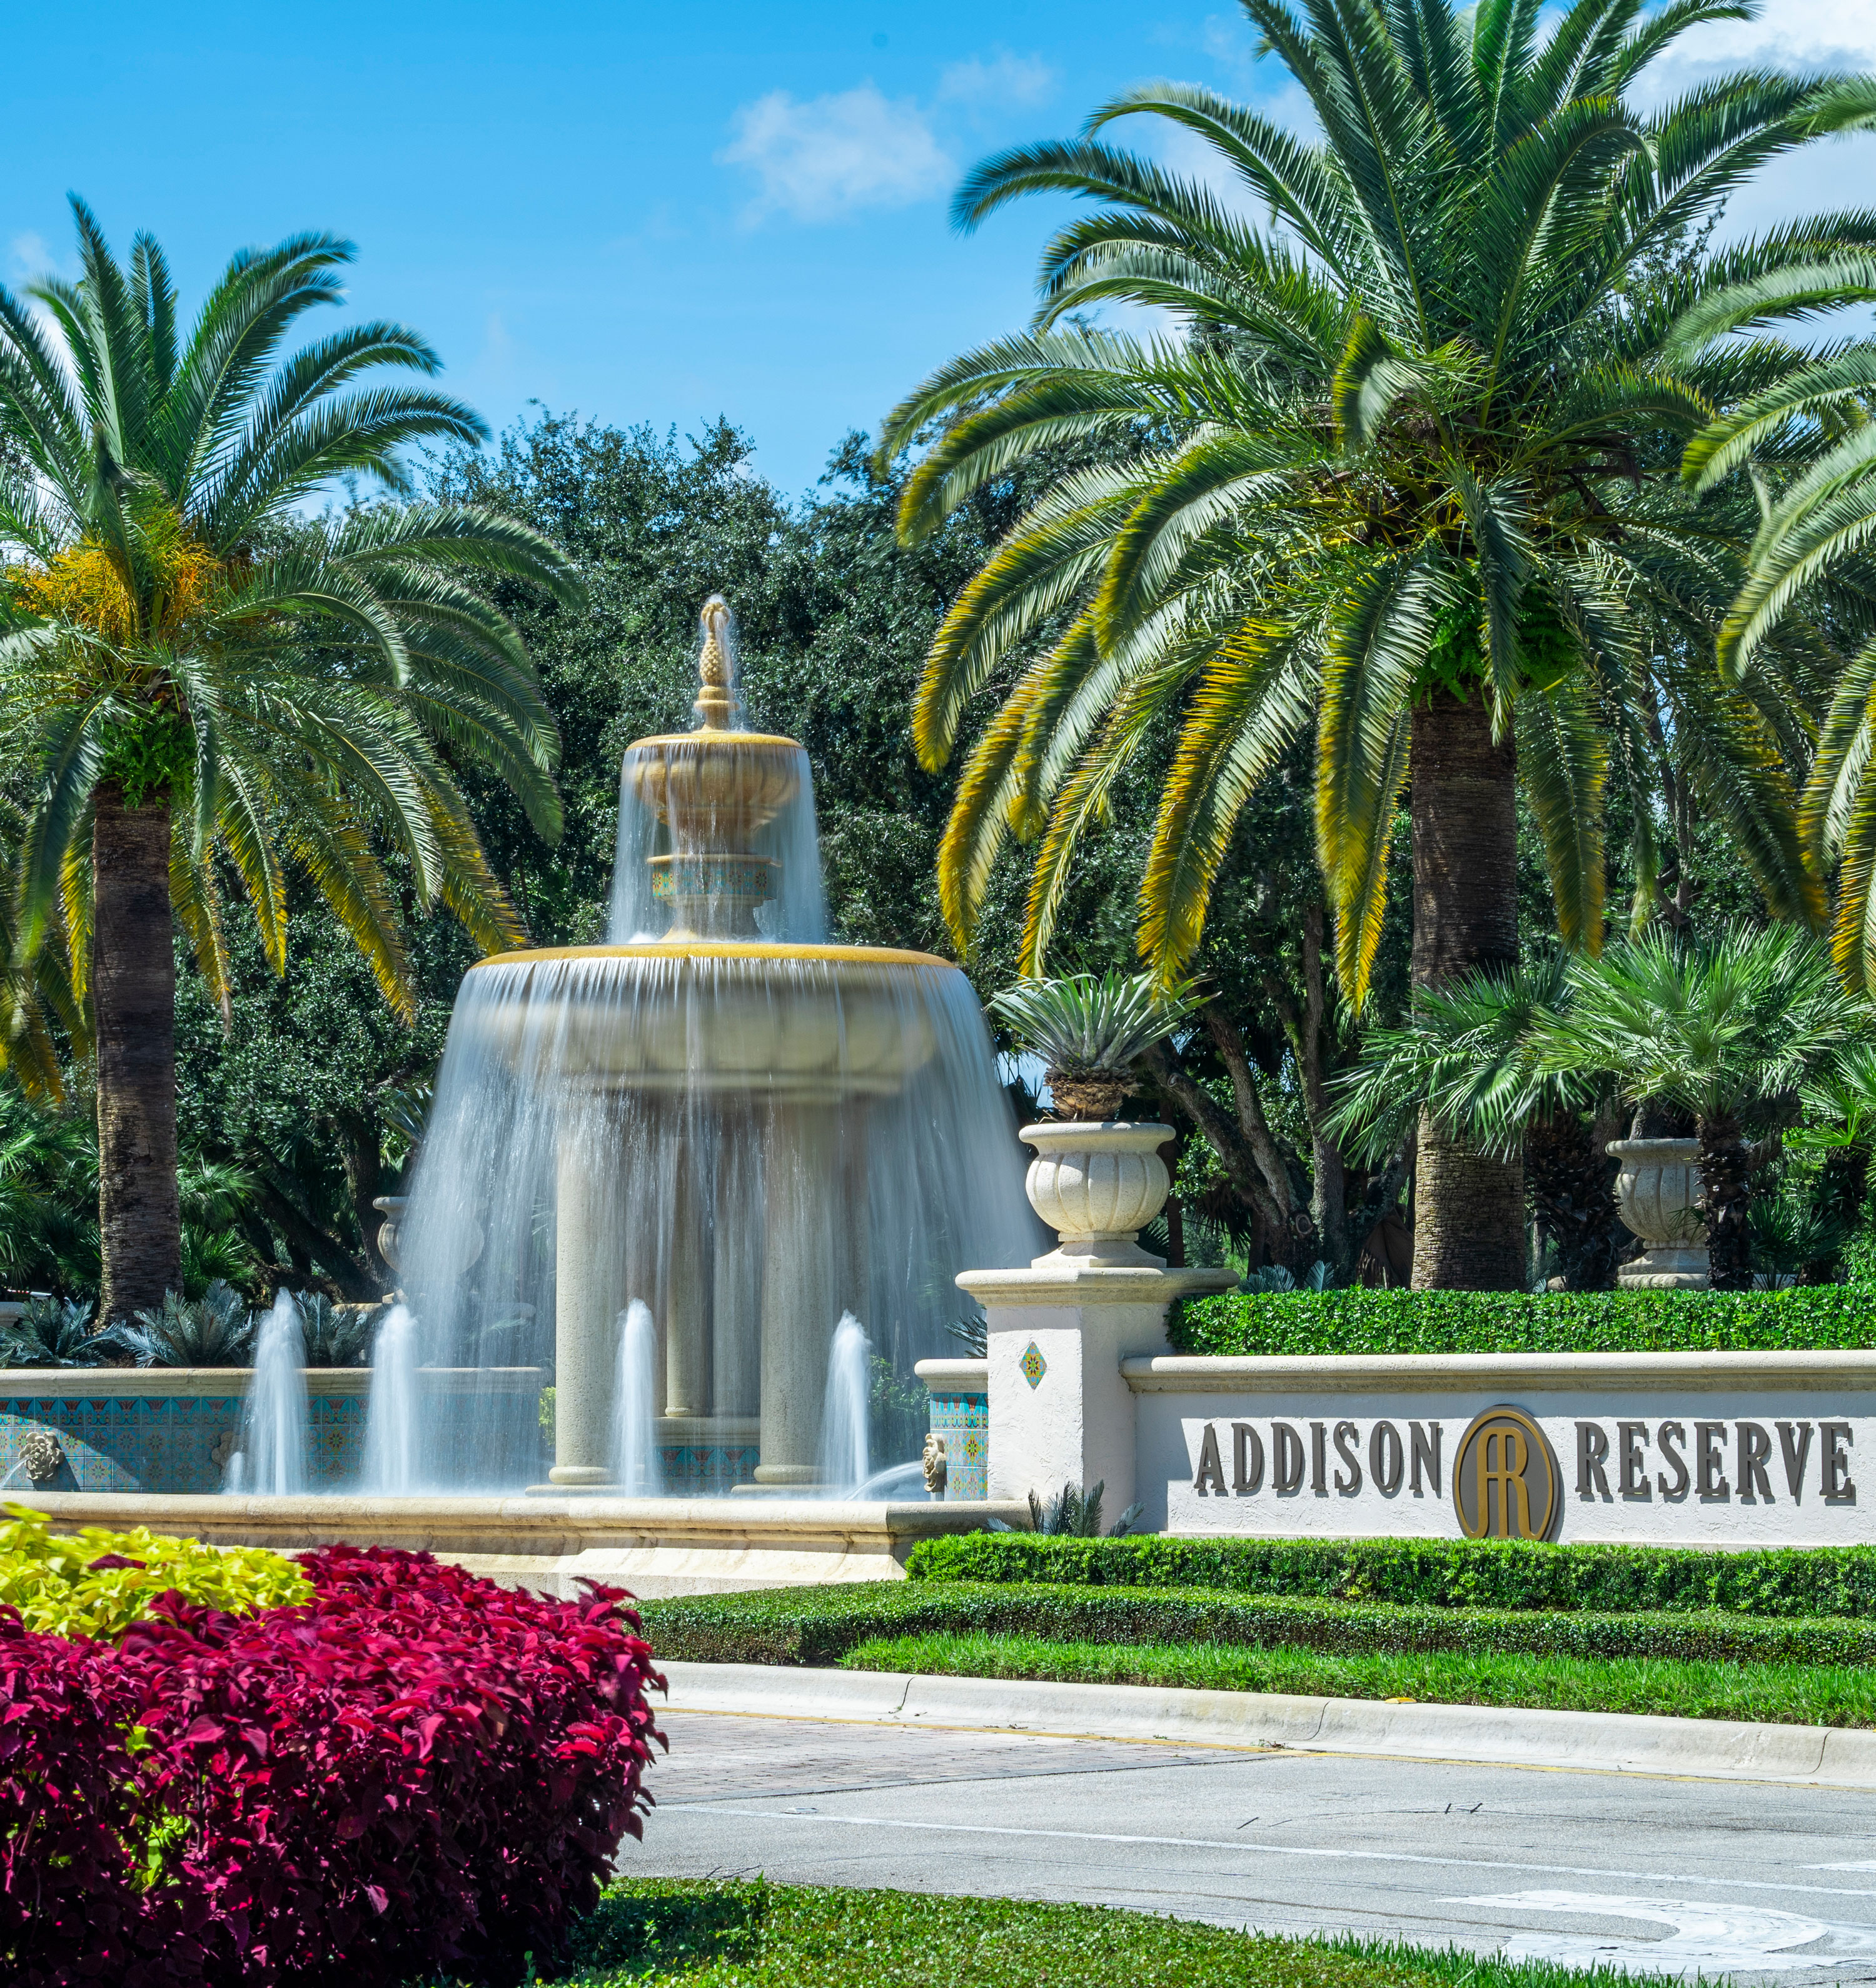 The fountain at Addison Reserve in Florida